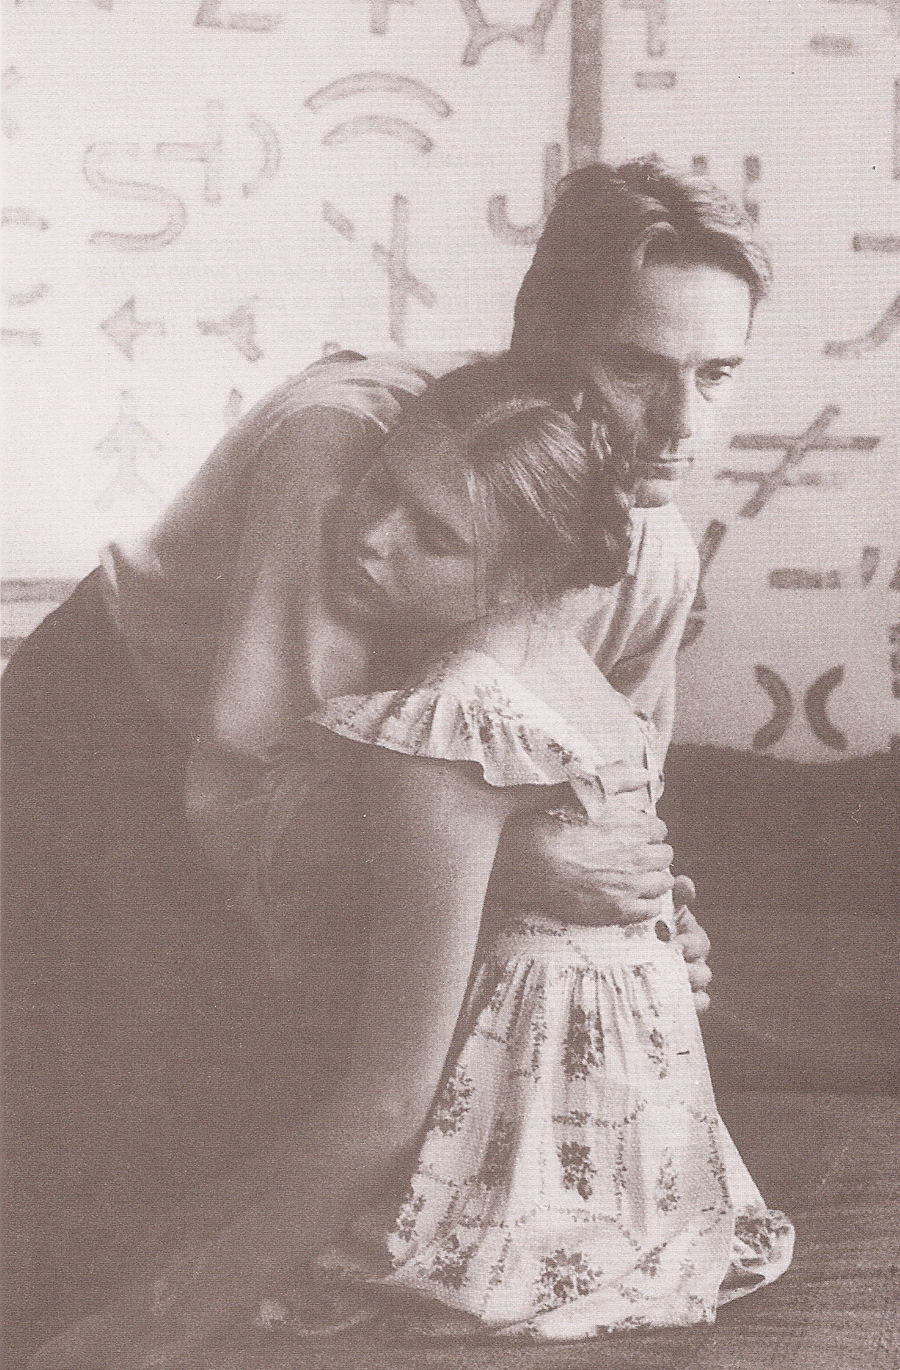 Scans of Jeremy Irons  from Lolita - The Book of the Film